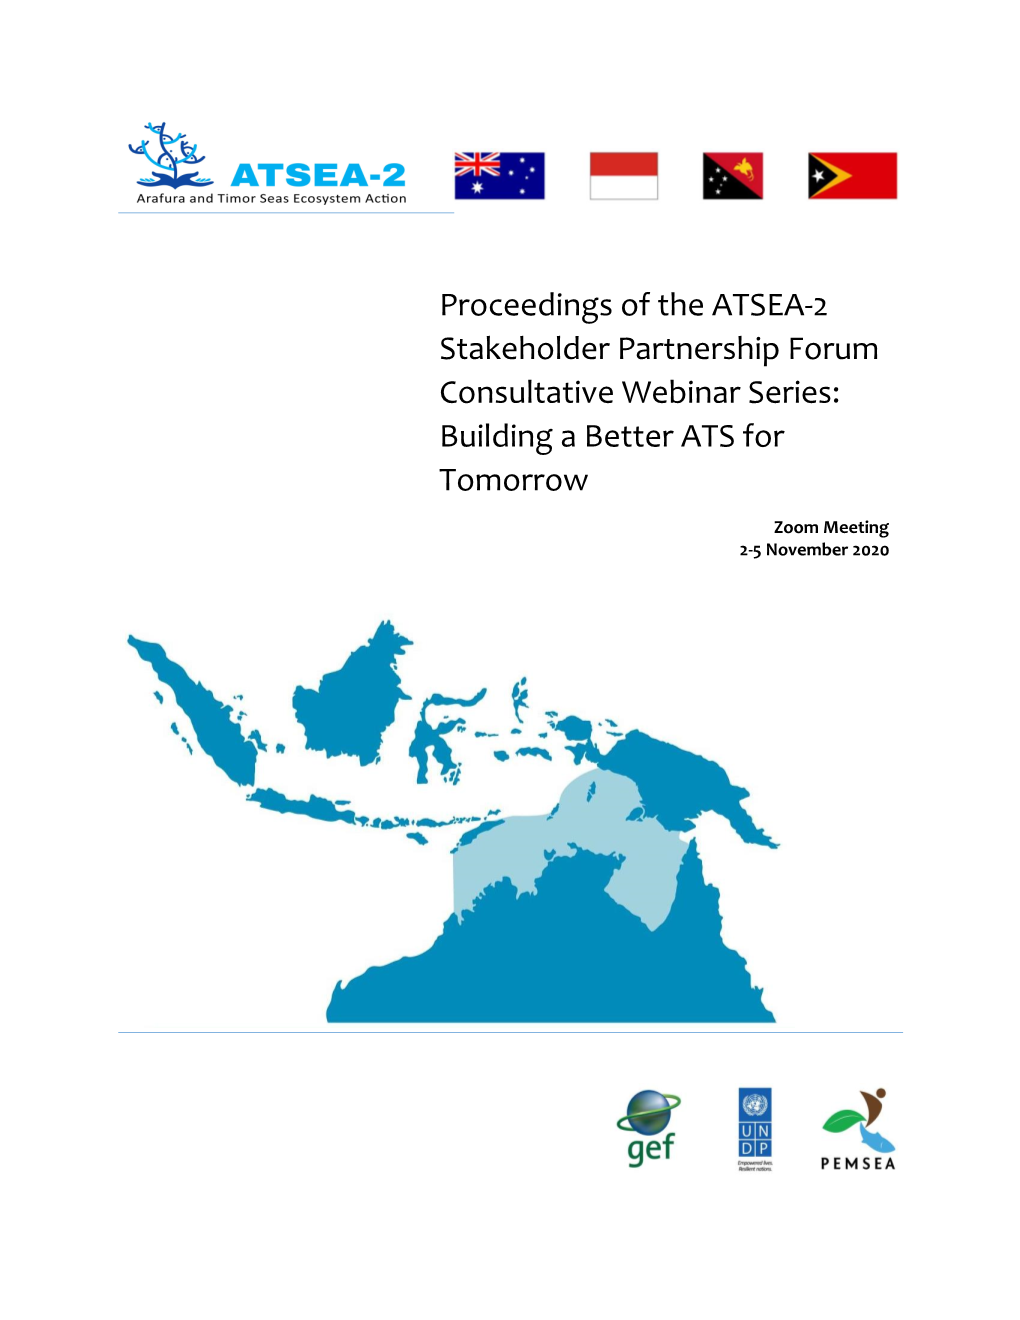 Proceedings of the ATSEA-2 Stakeholder Partnership Forum Consultative Webinar Series: Building a Better ATS For